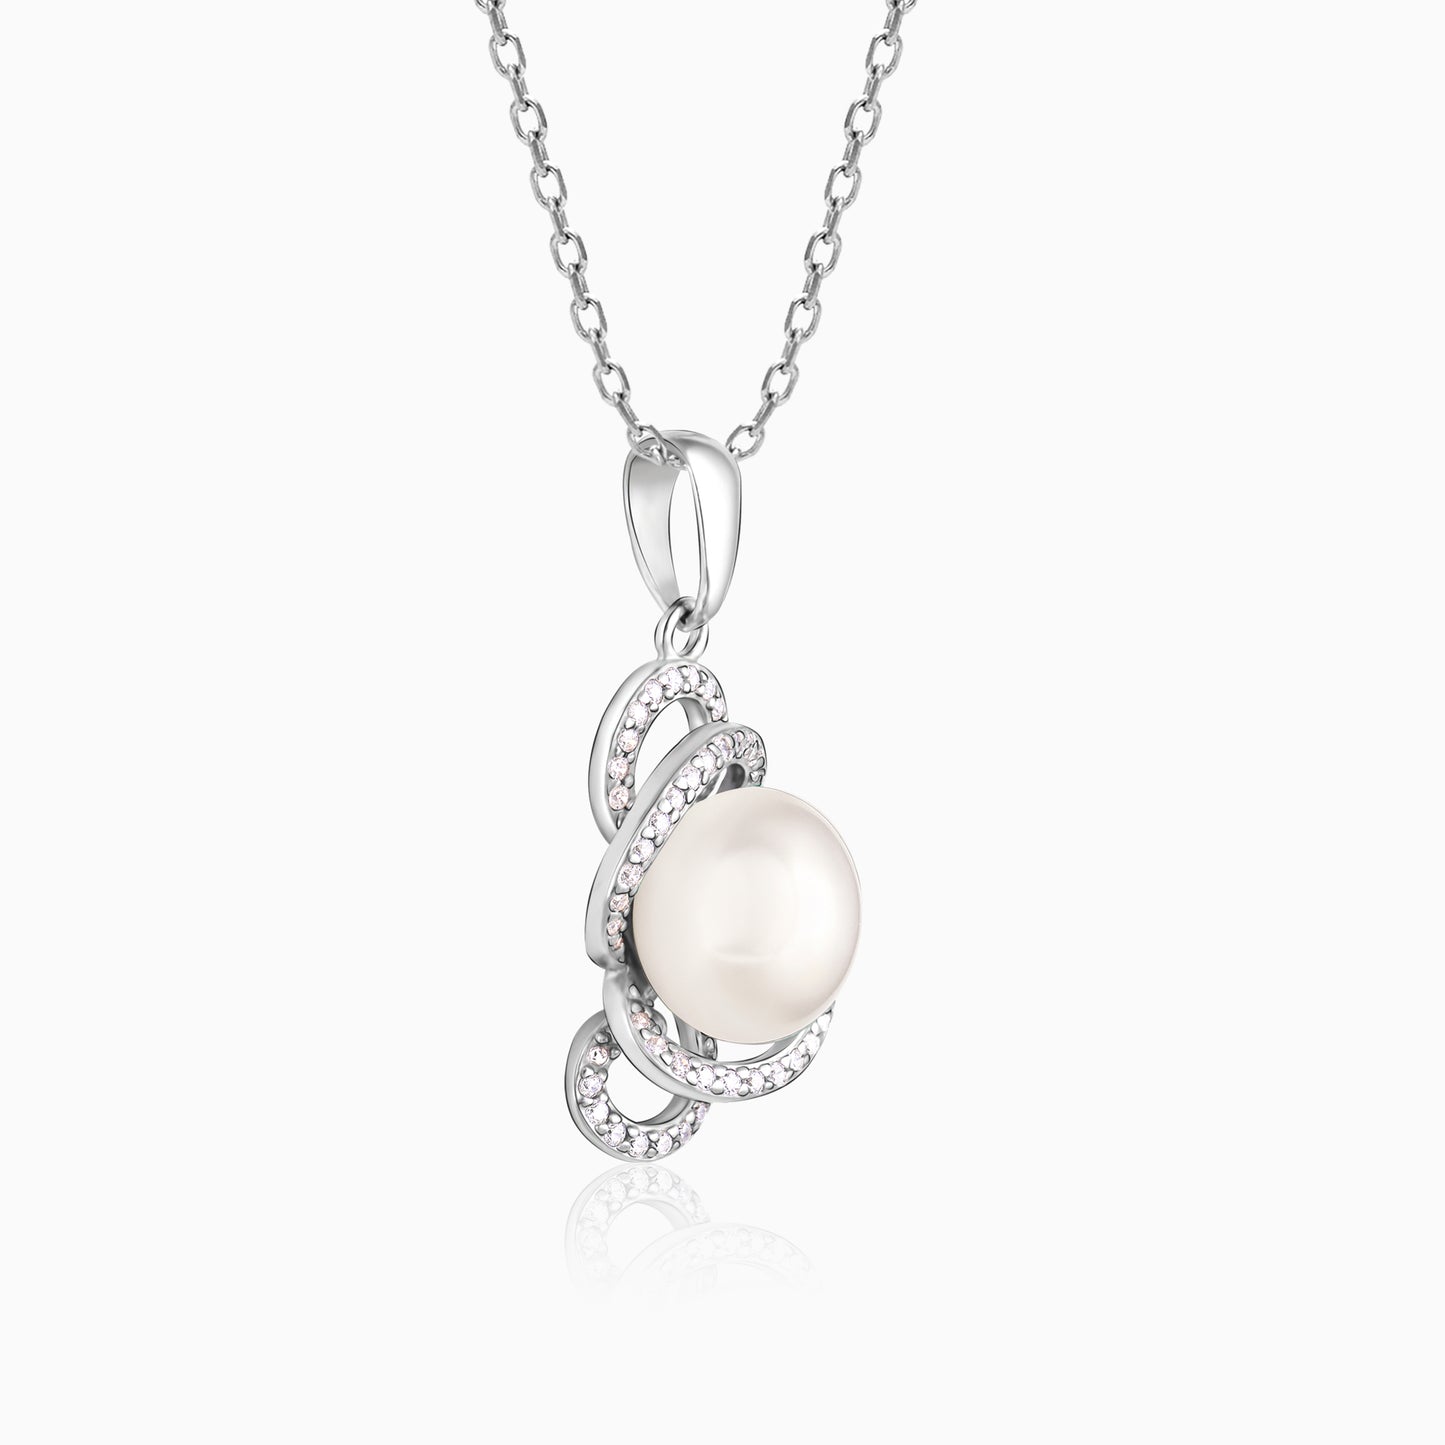 Silver Pearl Swirl Pendant with Link Chain